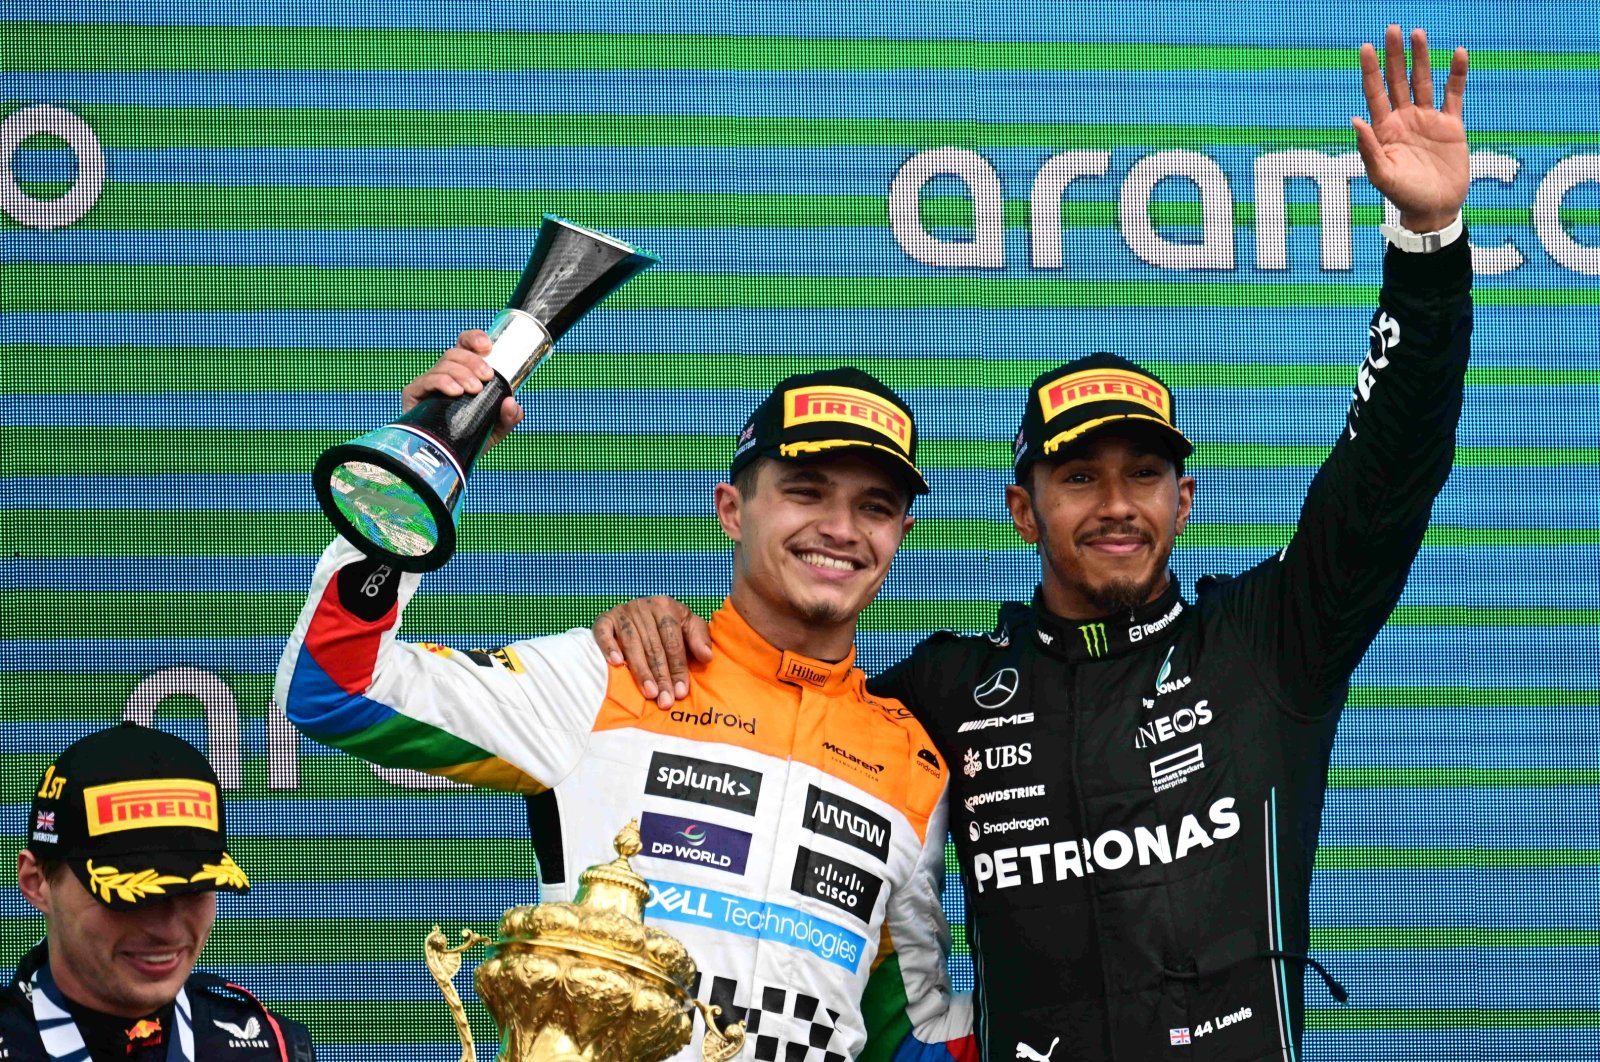 Second placed British Formula One driver Lando Norris (C) of McLaren F1 Team, first placed Dutch Formula One driver Max Verstappen (L) of Red Bull Racing and third placed British Formula One driver Lewis Hamilton (R) of Mercedes-AMG Petronas celebrate on the podium for the Formula 1 British Grand Prix 2023, at the Silverstone Circuit race track, Silverstone, UK., July 9, 2023. (EPA Photo)